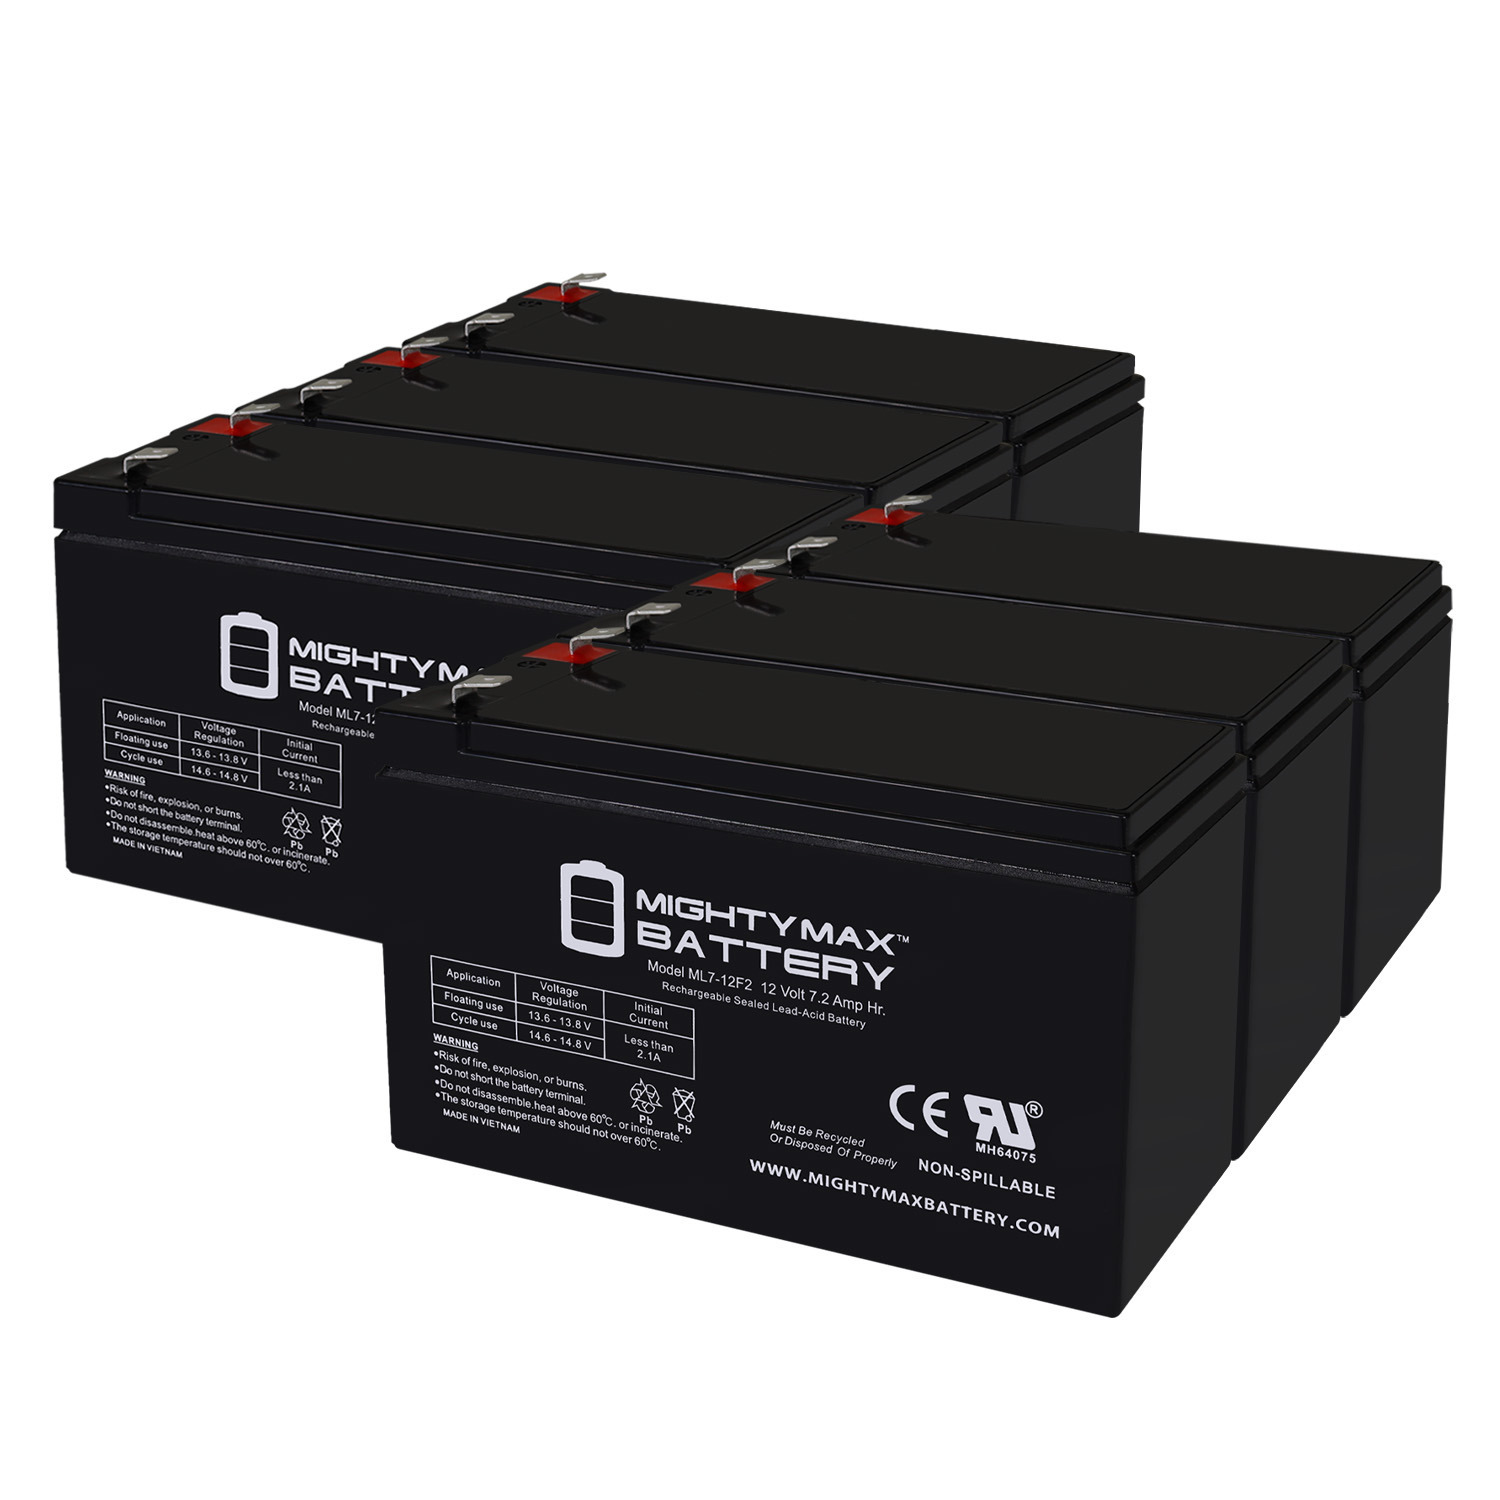 12V 7Ah F2 Replacement Battery for Minuteman BP144V13 - 6 Pack